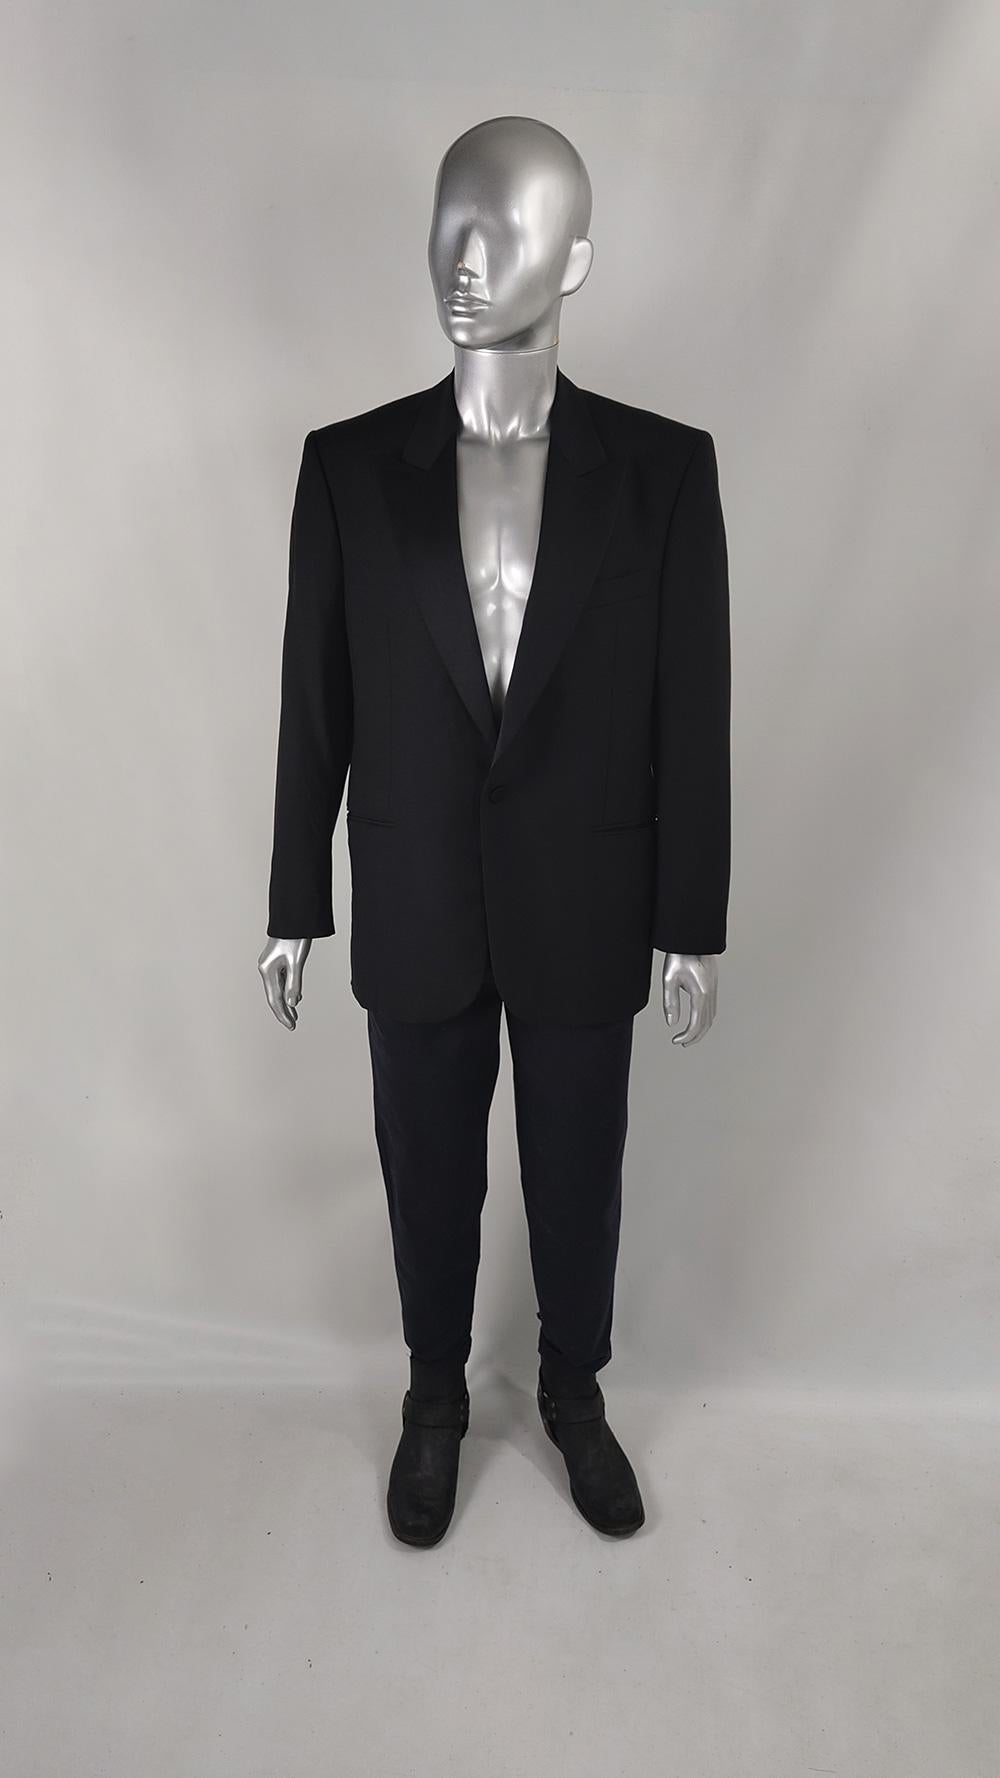 A sleek and stylish vintage mens dinner jacket from the 80s by Italian label, Caesar International. It has matte satin peaked lapels and fastens with a single covered button to the front. Made from a wool and mohair fabric with welt pockets that